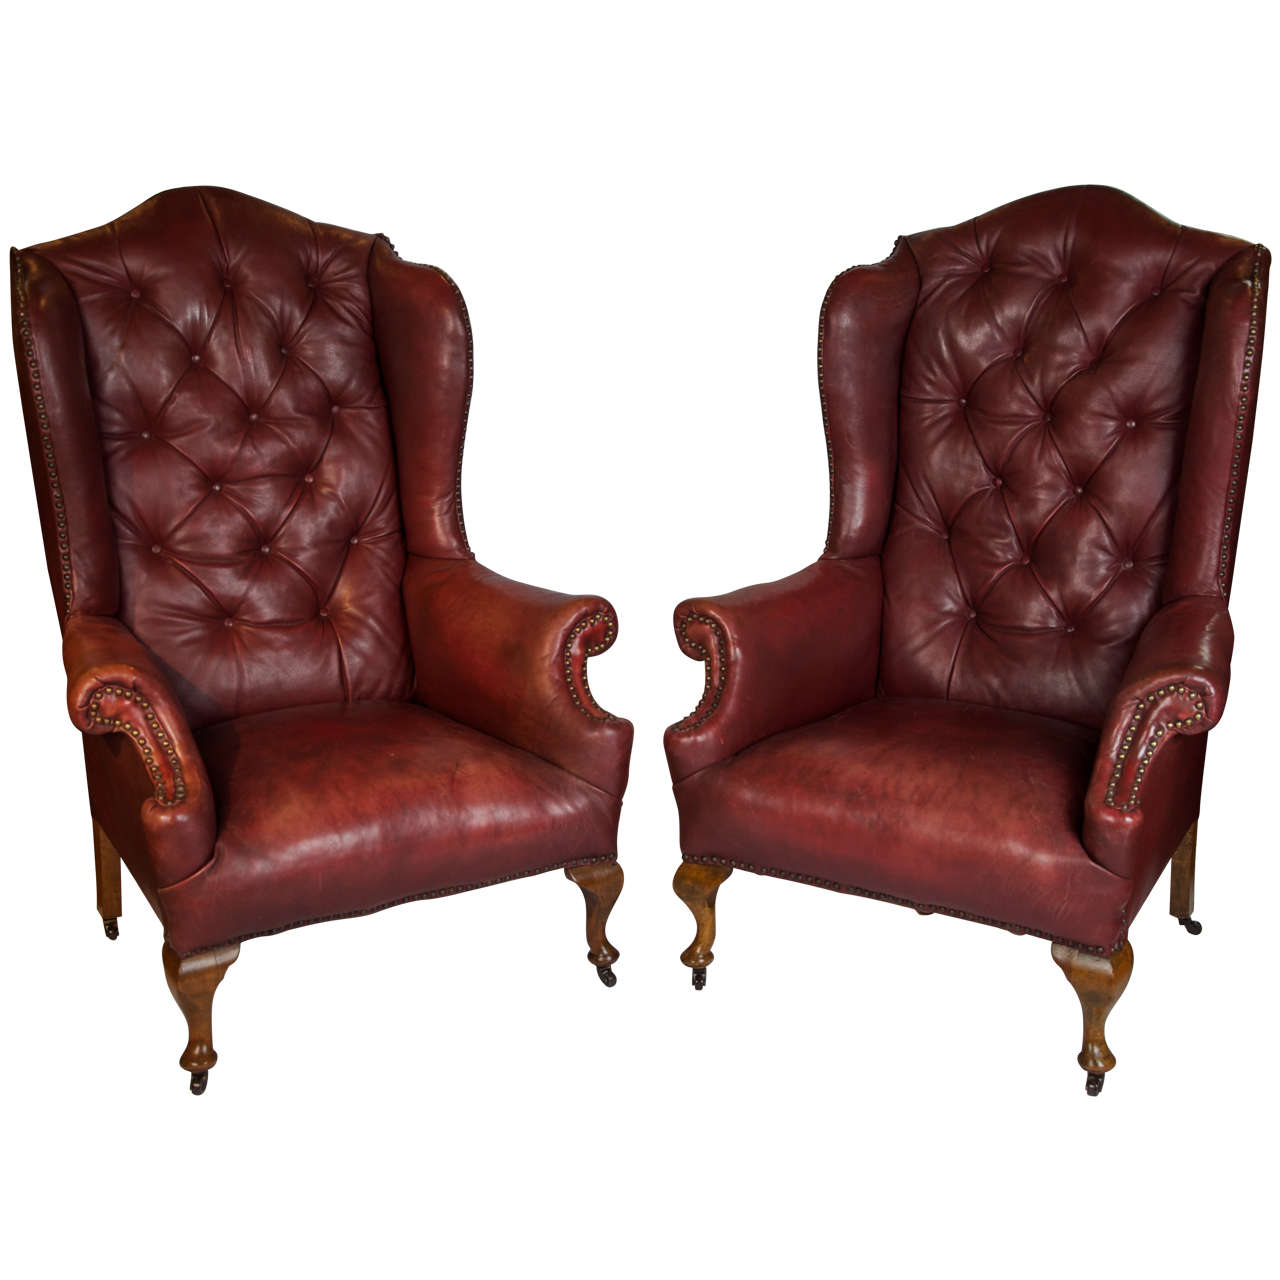 Pair of Early 20th Century Red Leather Wing Back Chairs